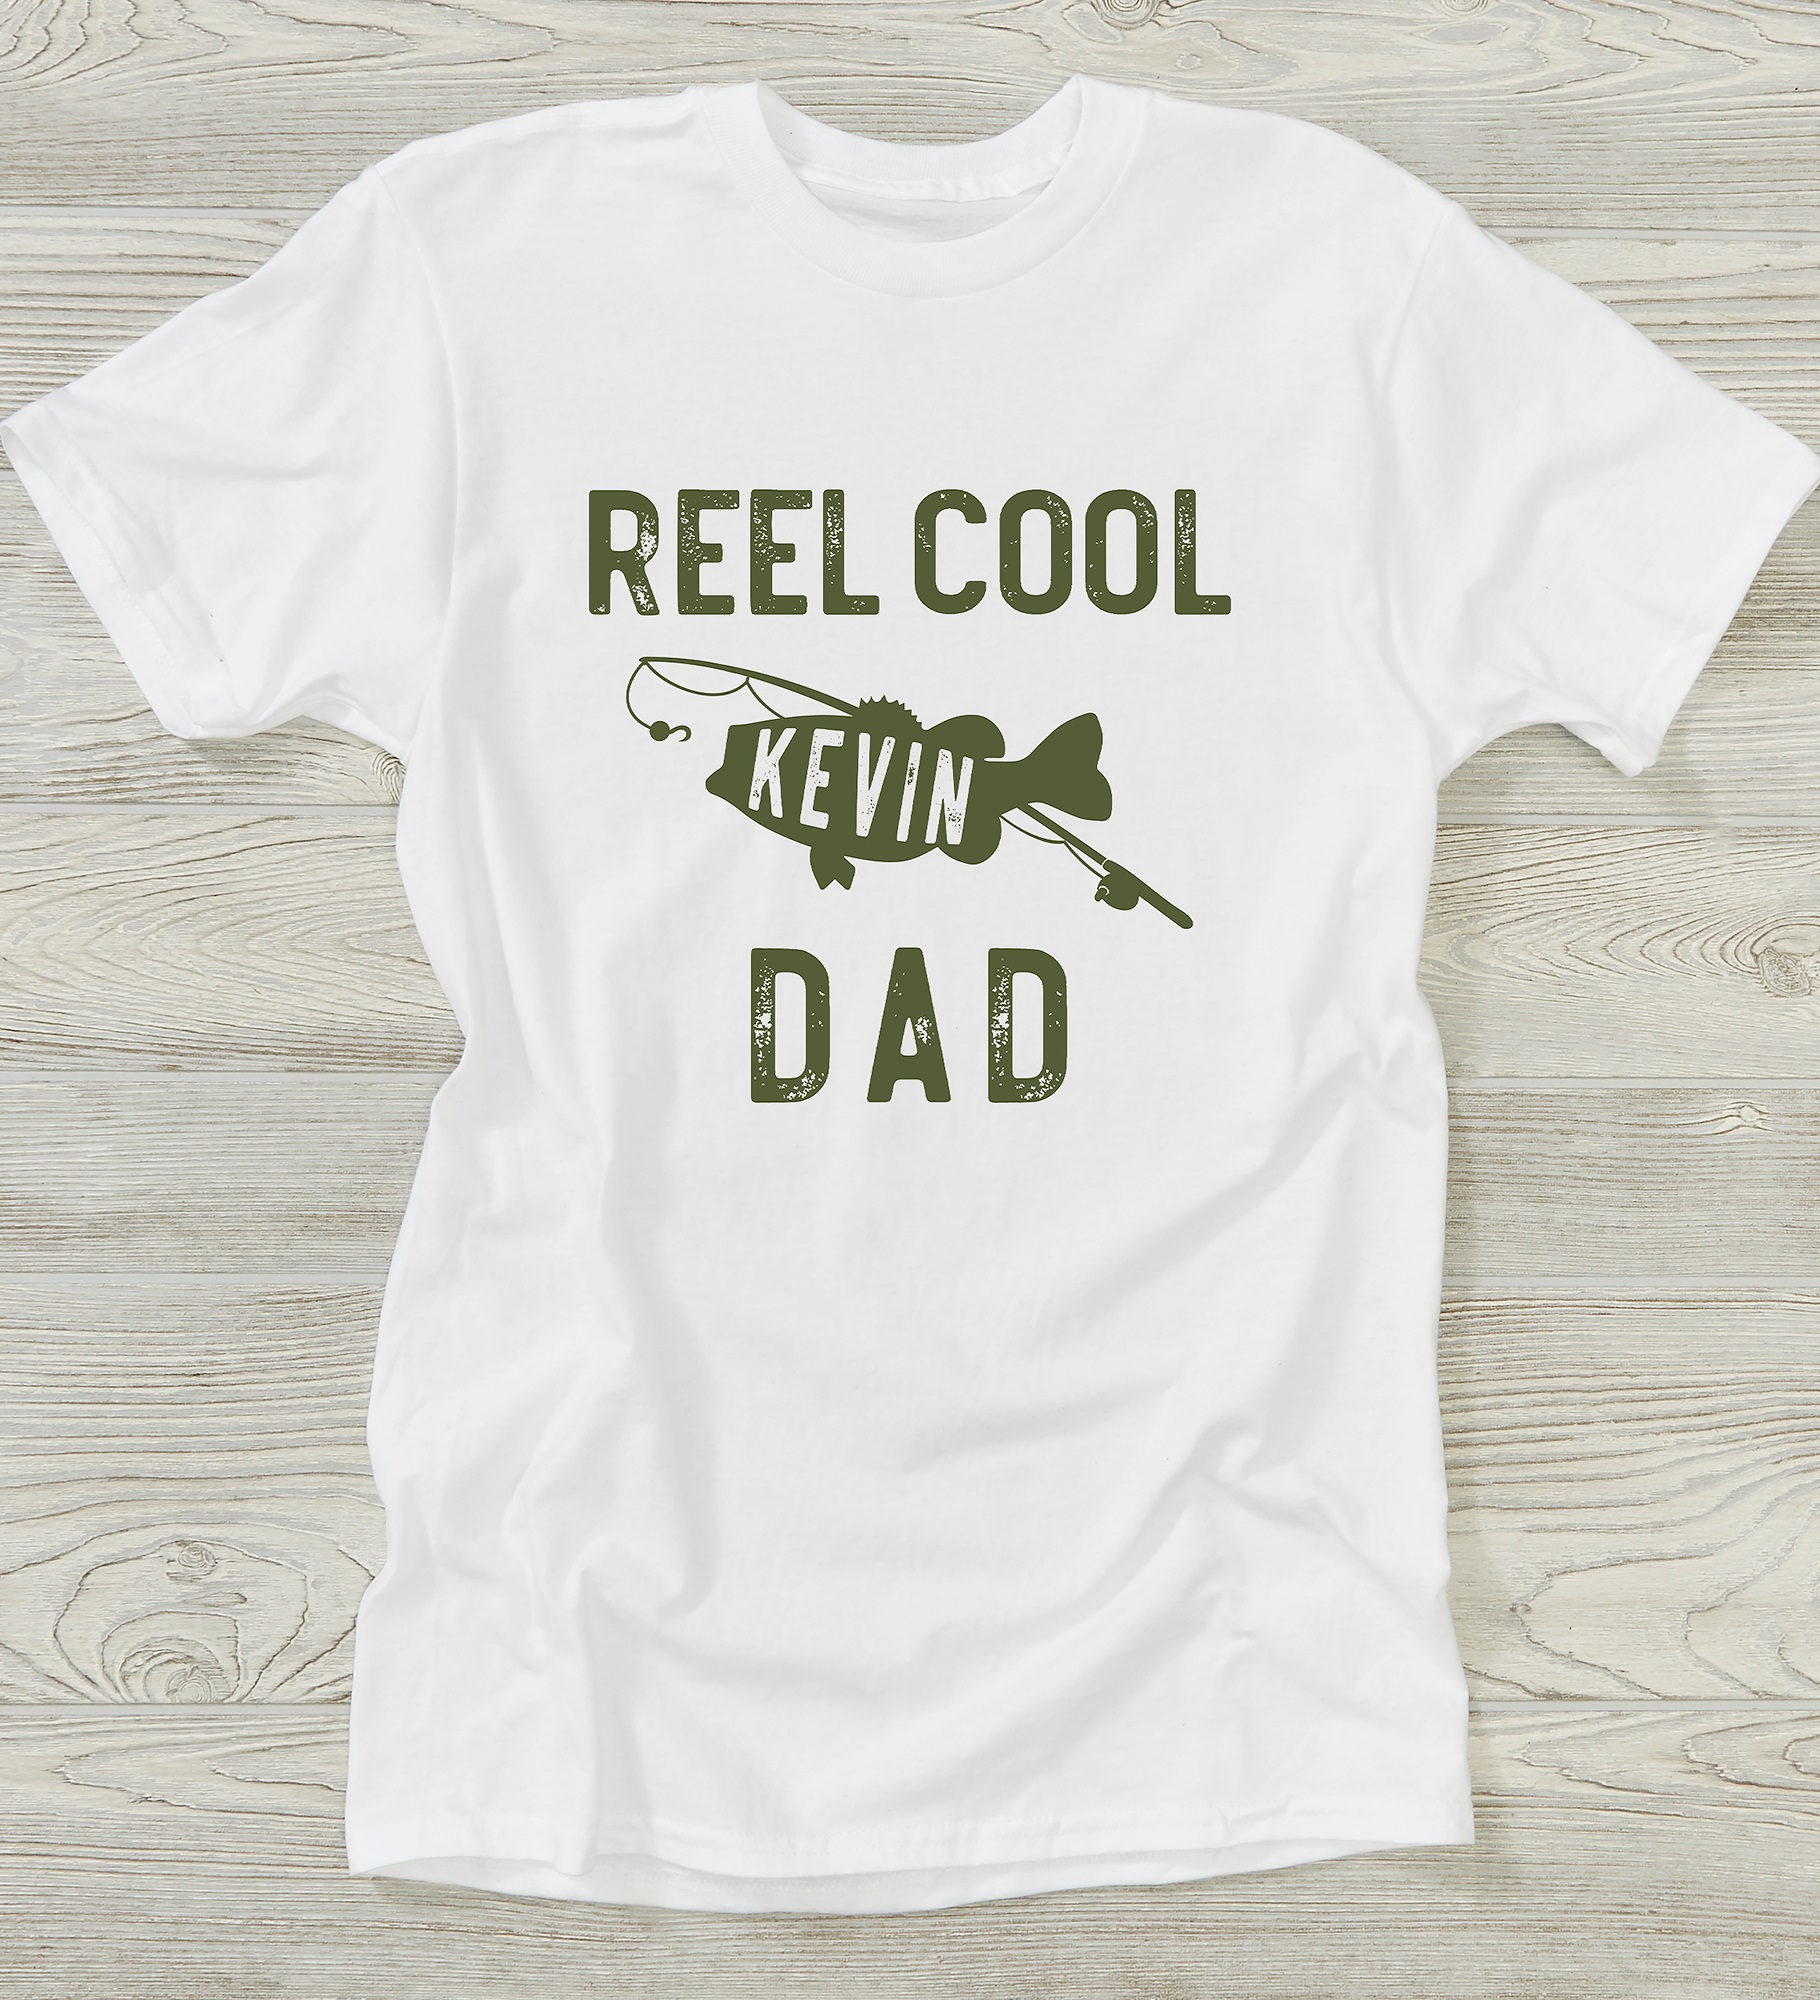 Personalized Fishing Gifts & Hunting Gear